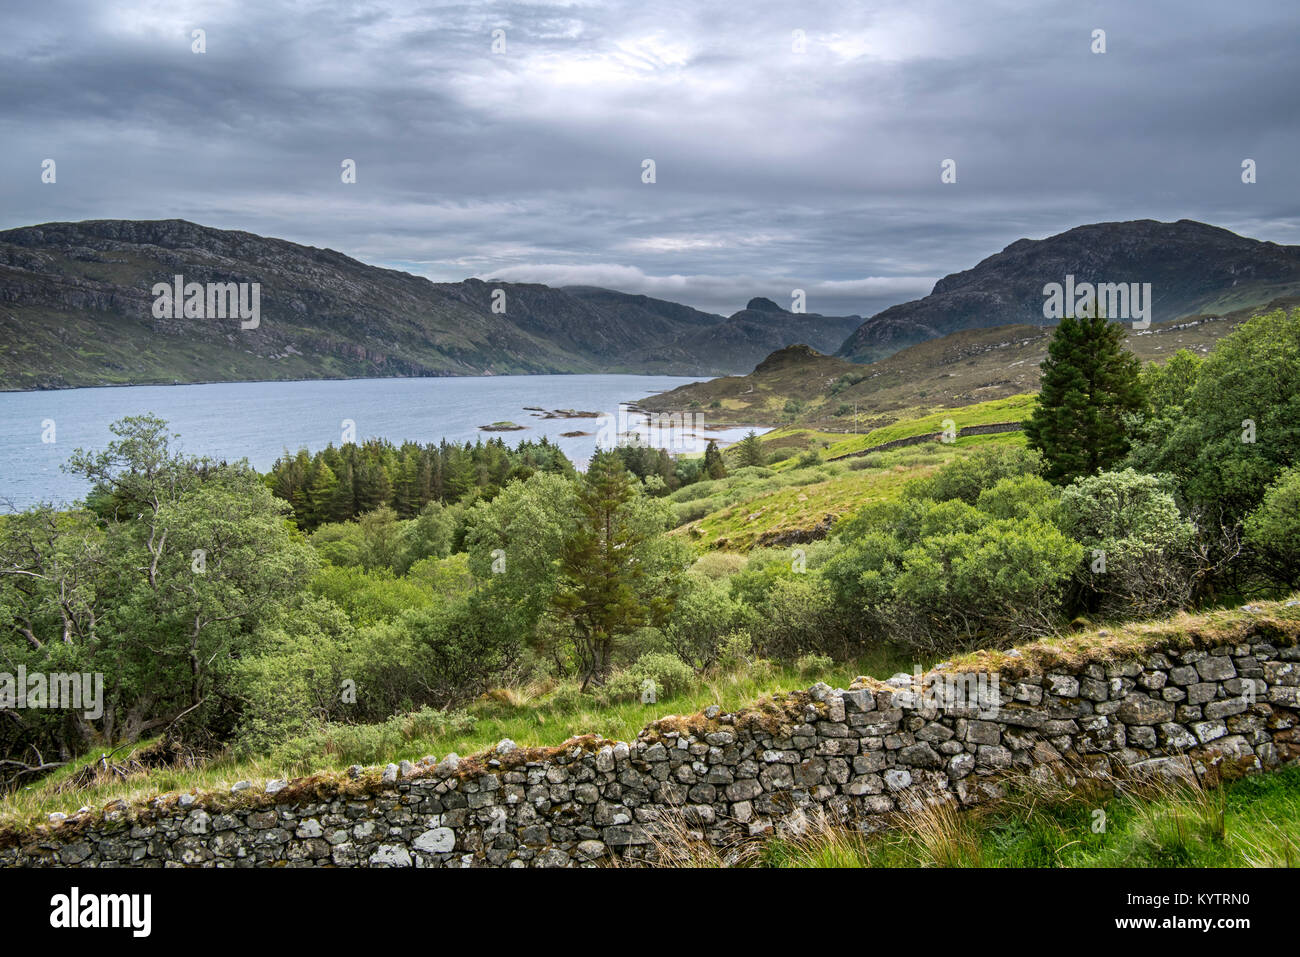 Old dry stone wall and Loch Glencoul near Unapool and Gleann Dubh, Kylesku, Sutherland in the Highlands of Scotland, UK Stock Photo